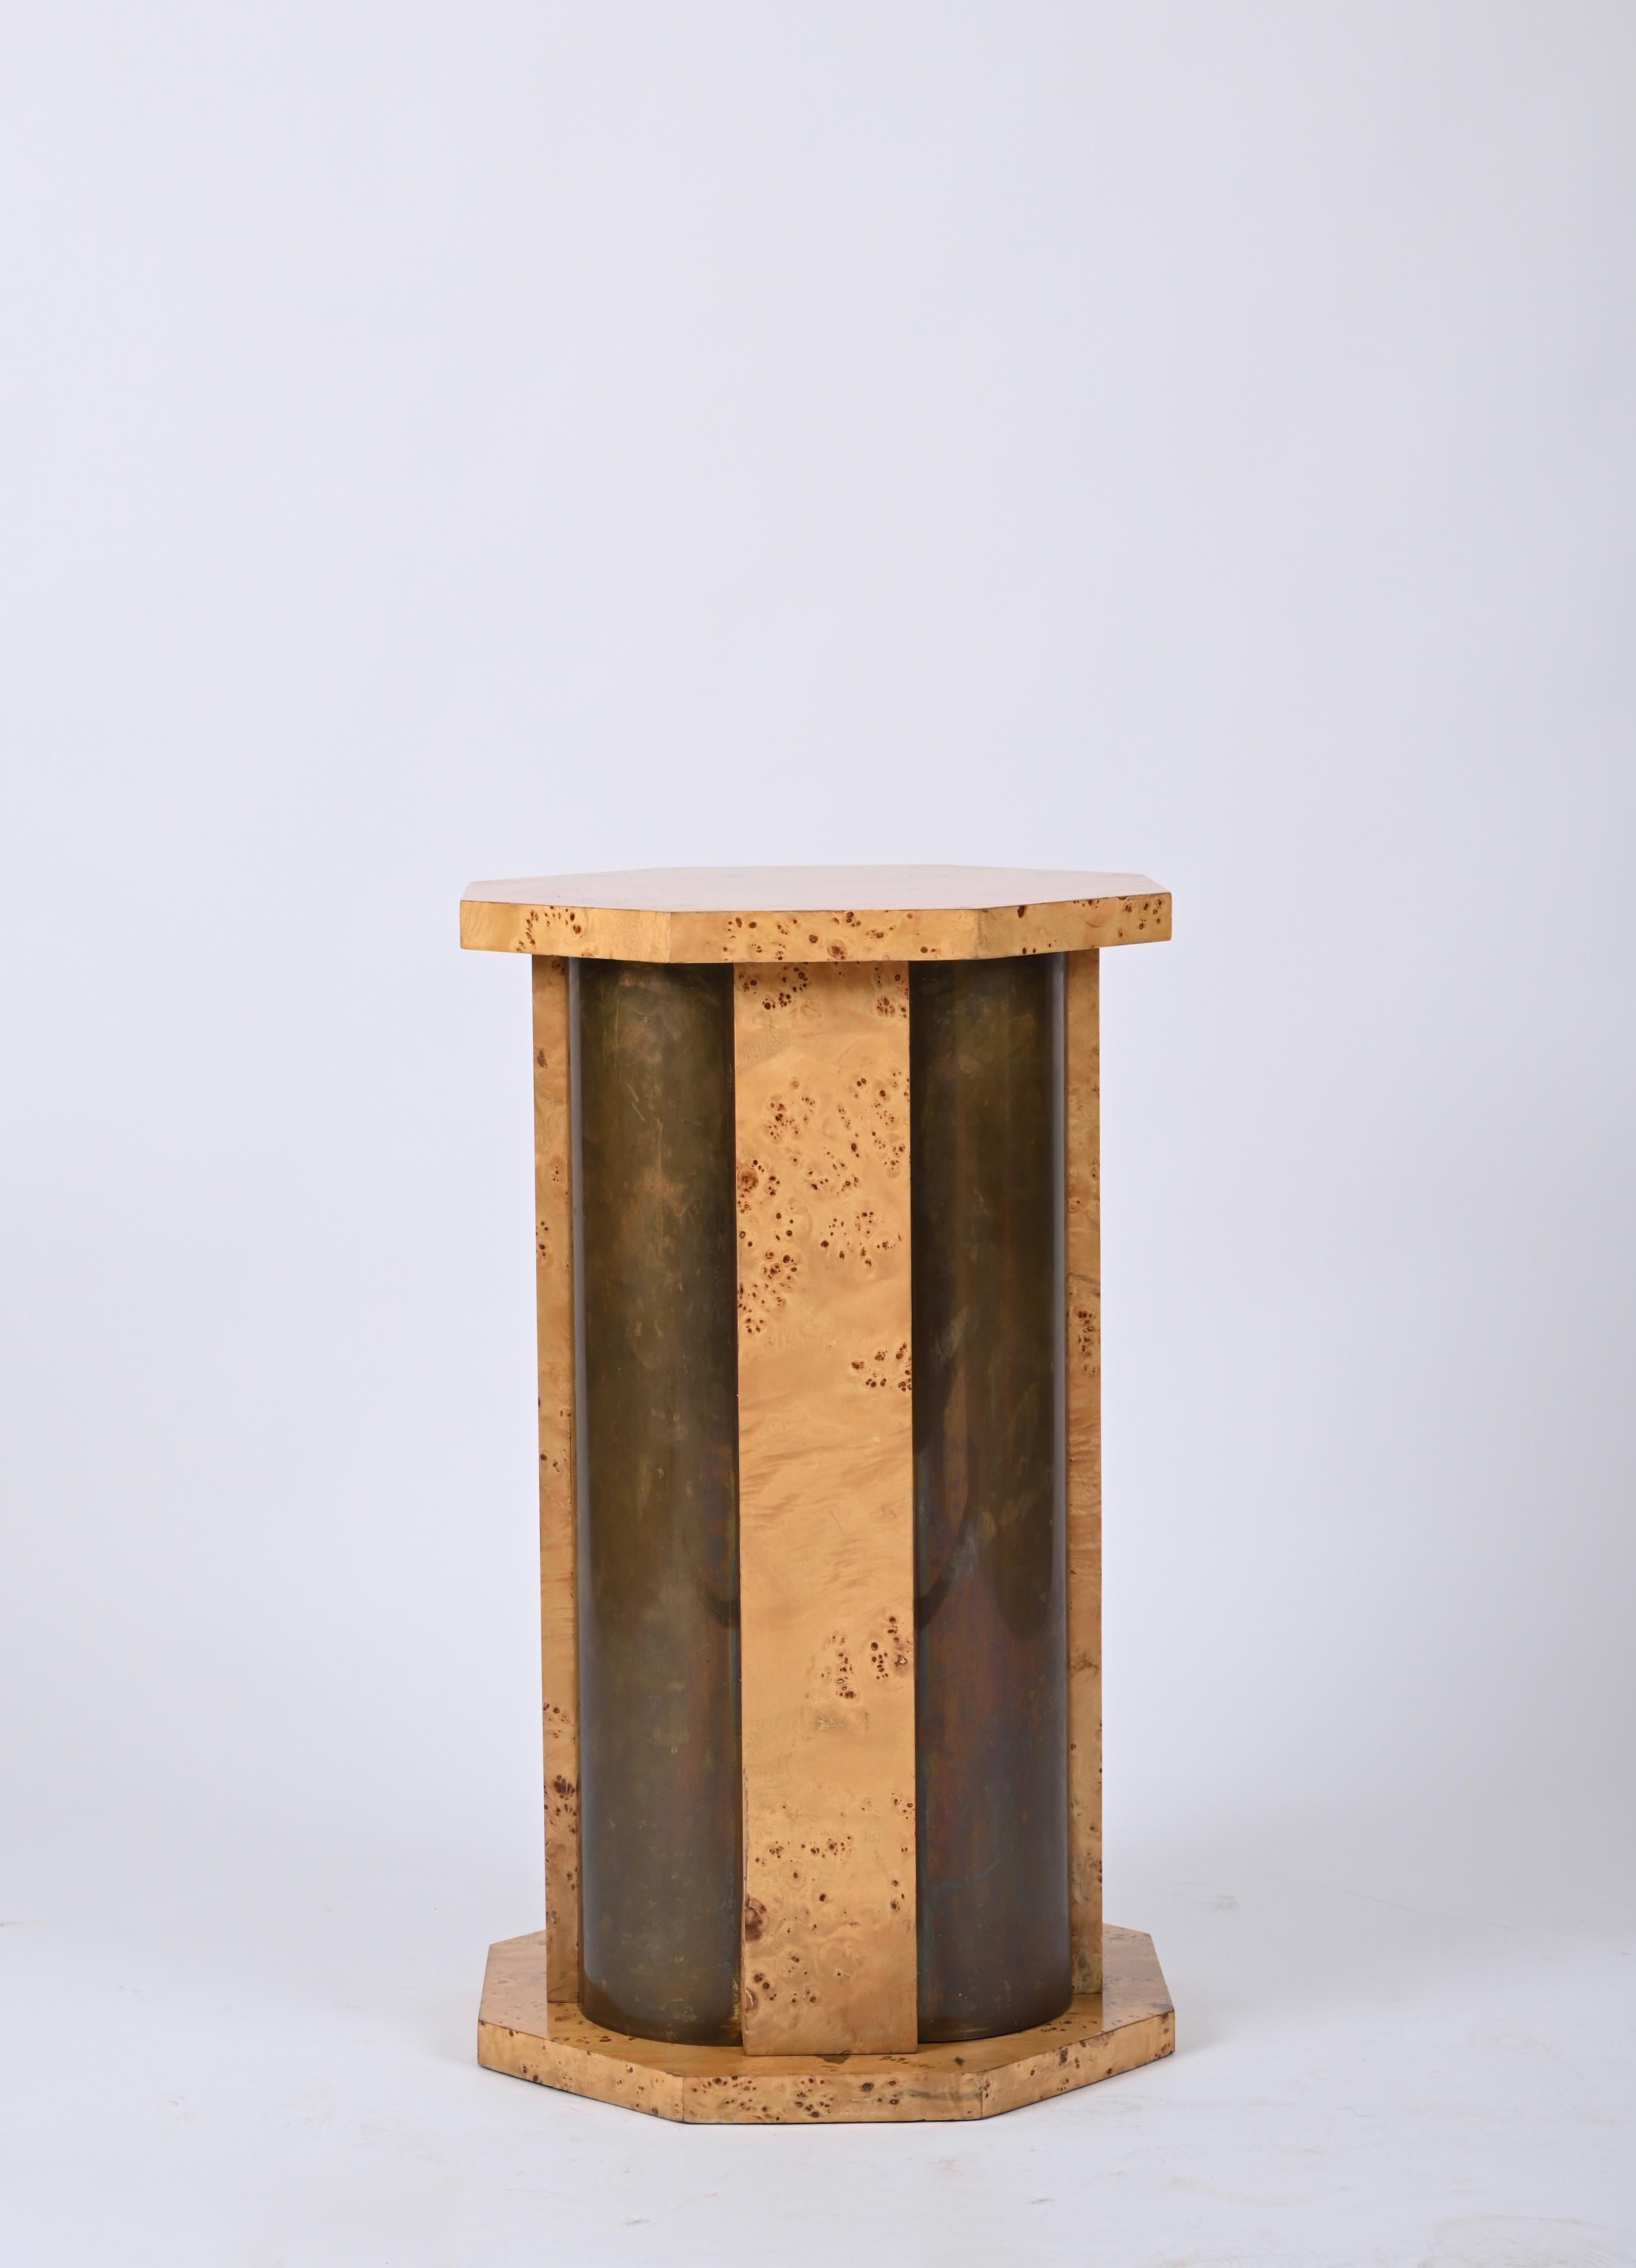 20th Century Tommaso Barbi Octagonal Table Pedestal in Burl Wood and Brass, Italy, 1970 For Sale